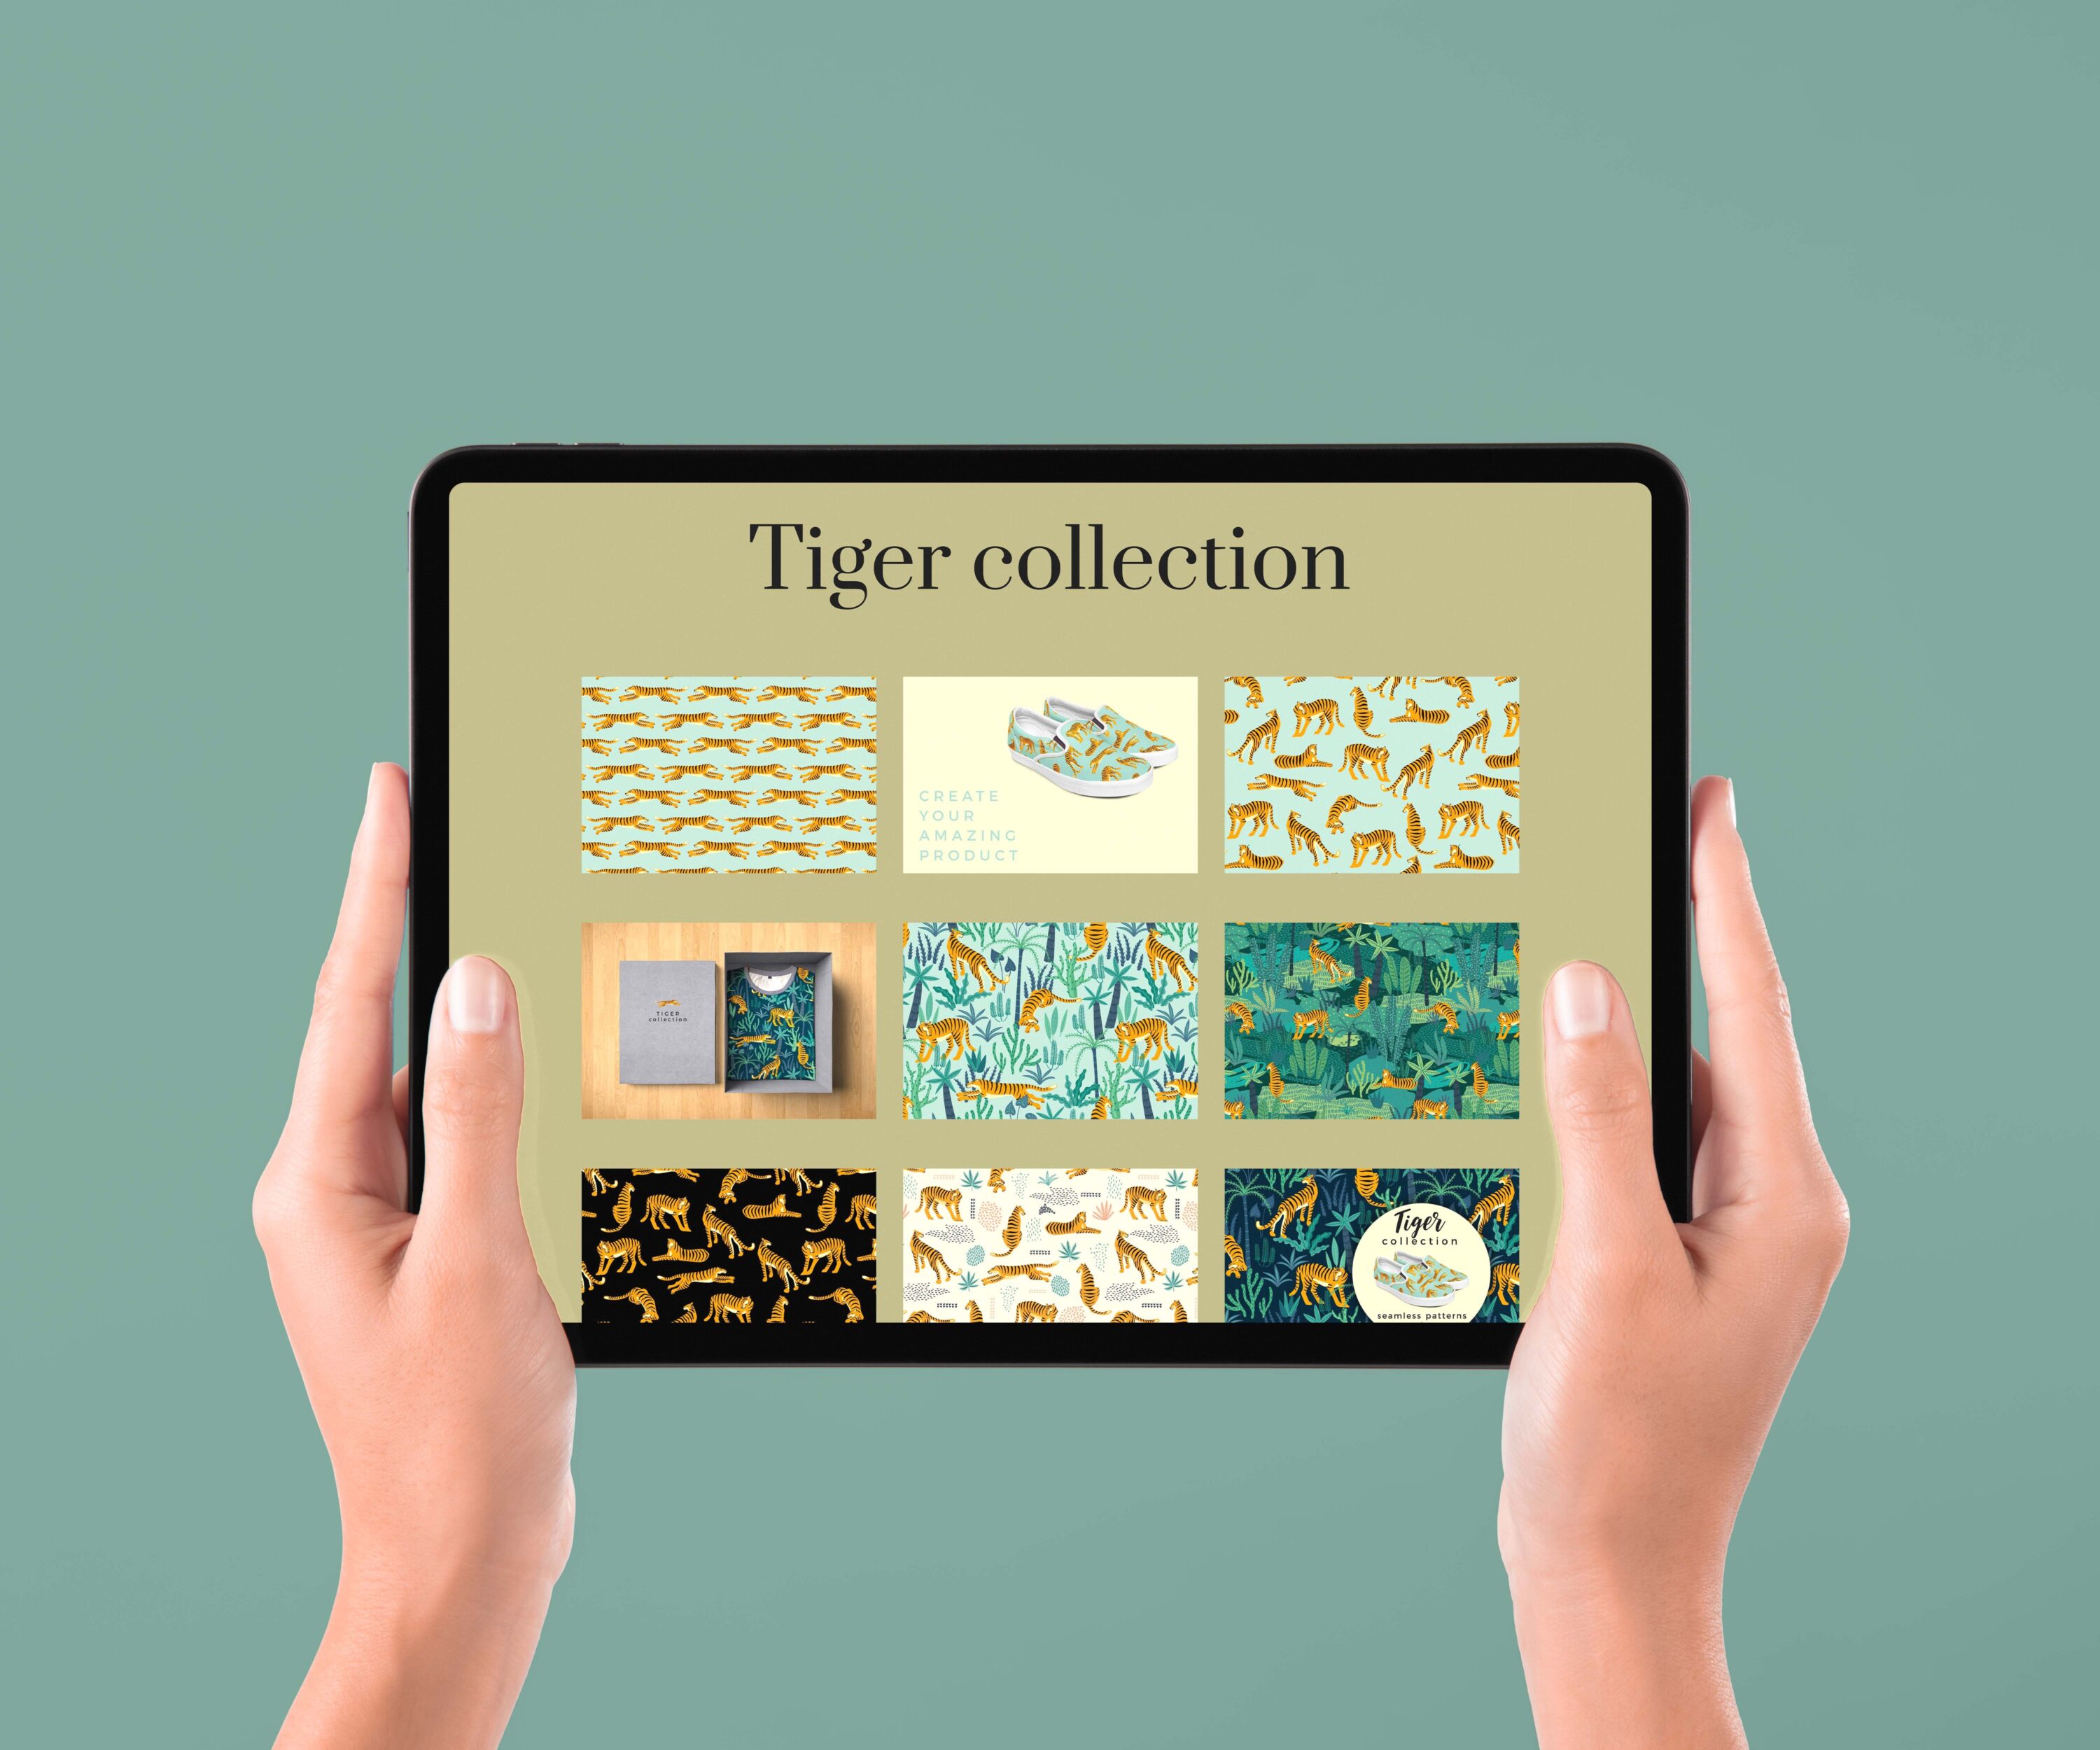 Tiger collection. Patterns & clipart - tablet.